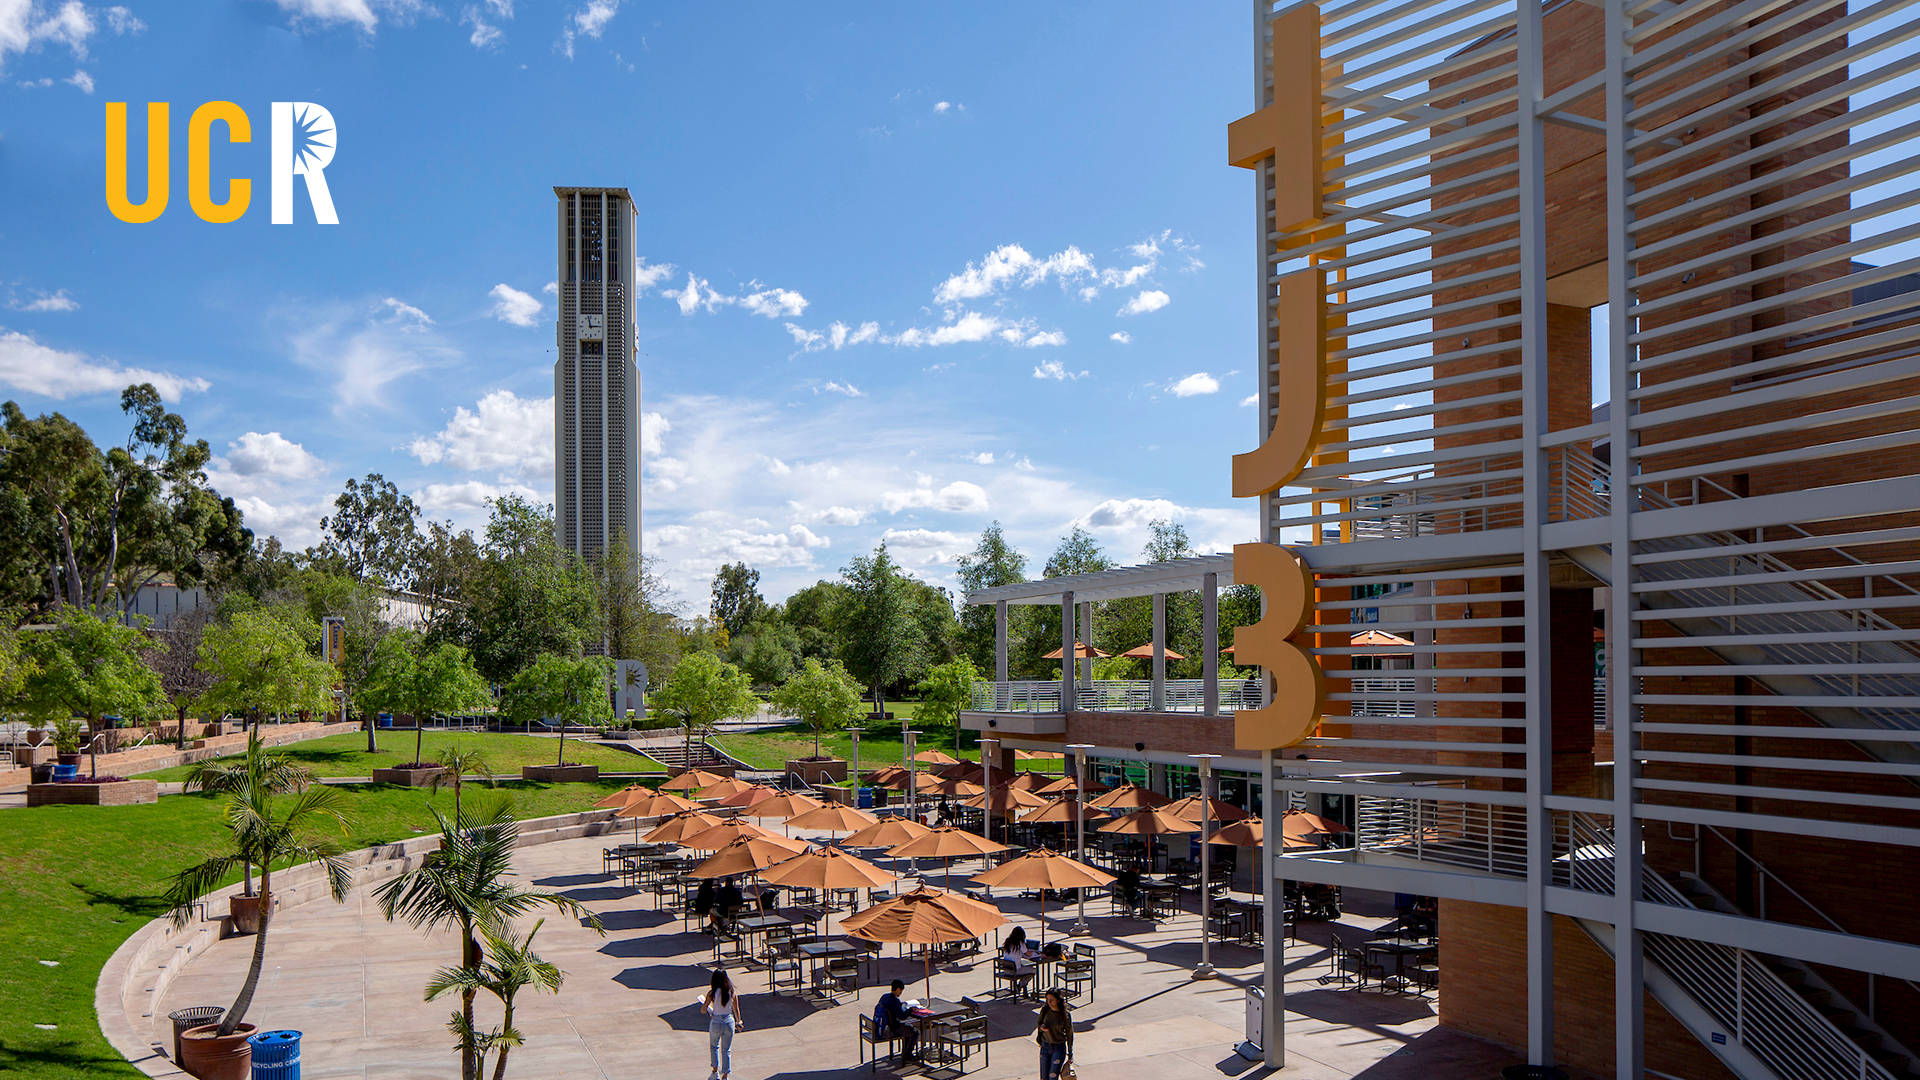 Ucr Carillon Bell Tower During Daytime Wallpaper